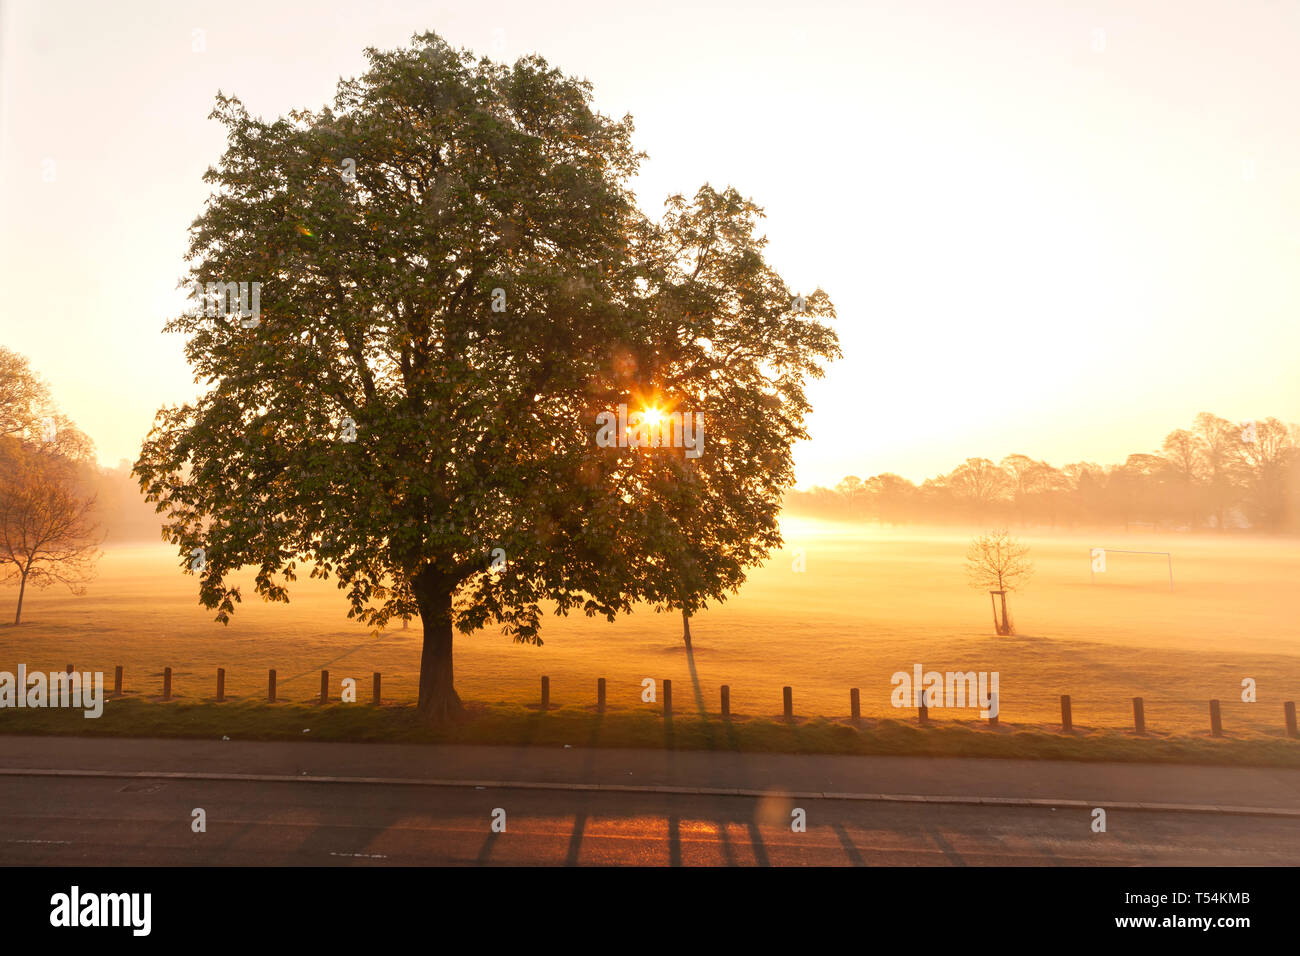 Northampton, UK. 21st April 2019, Weather. Early morning mist over Abington Park, a Horse Chestnut. Aesculus hippocastanum (Hippocastanaceae), stands in silhouette, with the sun rising behind, forecast for another hot bright day. Credit: Keith J Smith./Alamy Live News Stock Photo